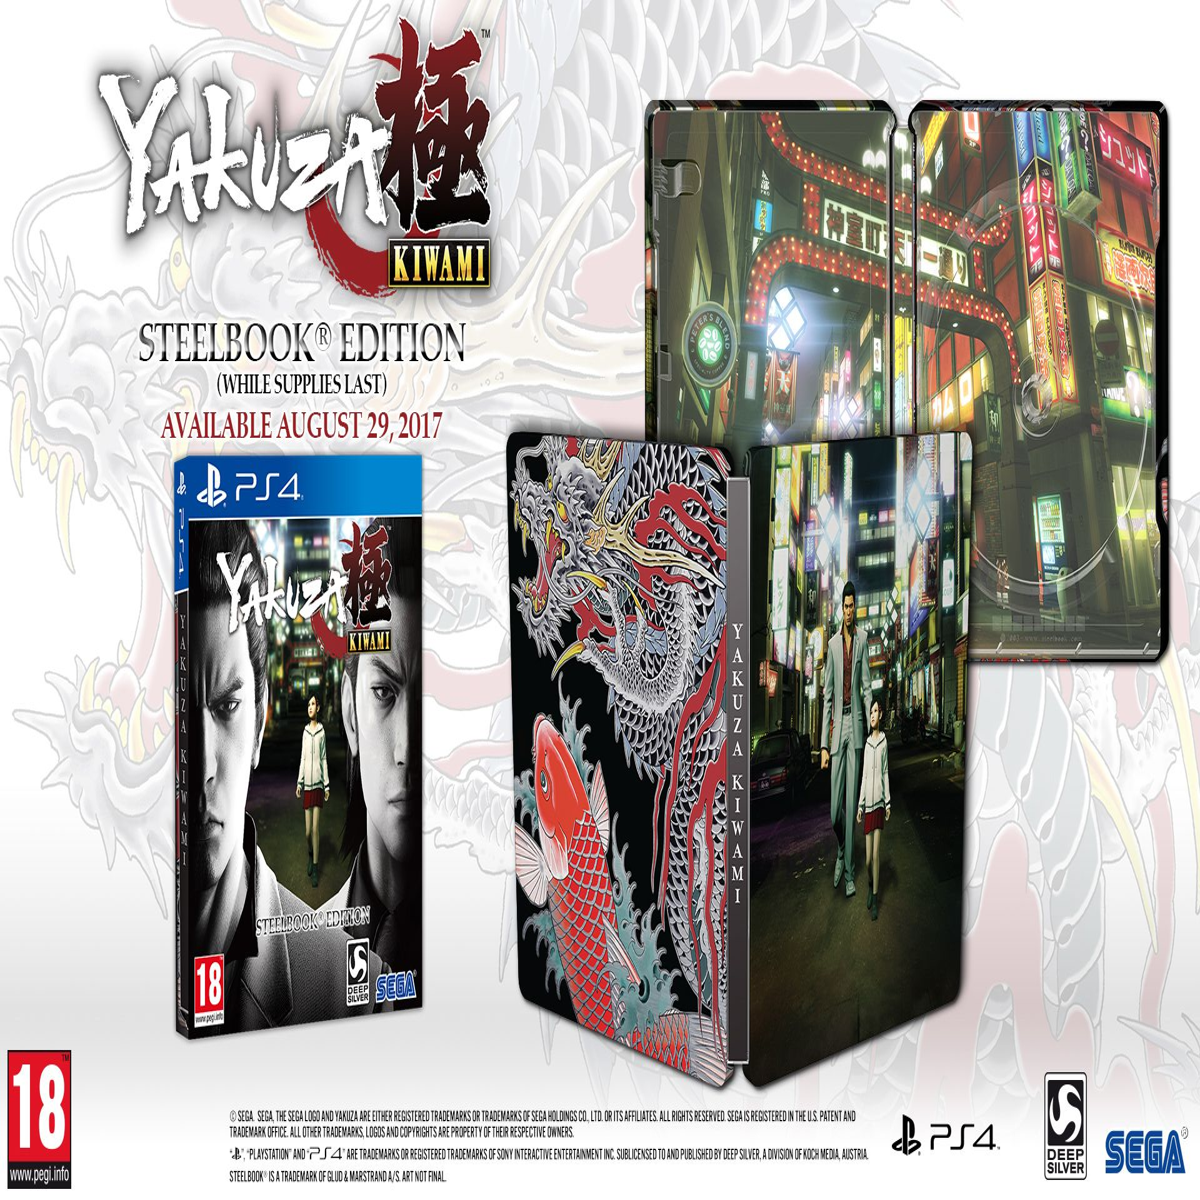 https://assetsio.reedpopcdn.com/jelly-deals-yakuza-kiwami-gets-a-release-date-and-steelbook-launch-edition-149201014405.jpg?width=1200&height=1200&fit=crop&quality=100&format=png&enable=upscale&auto=webp